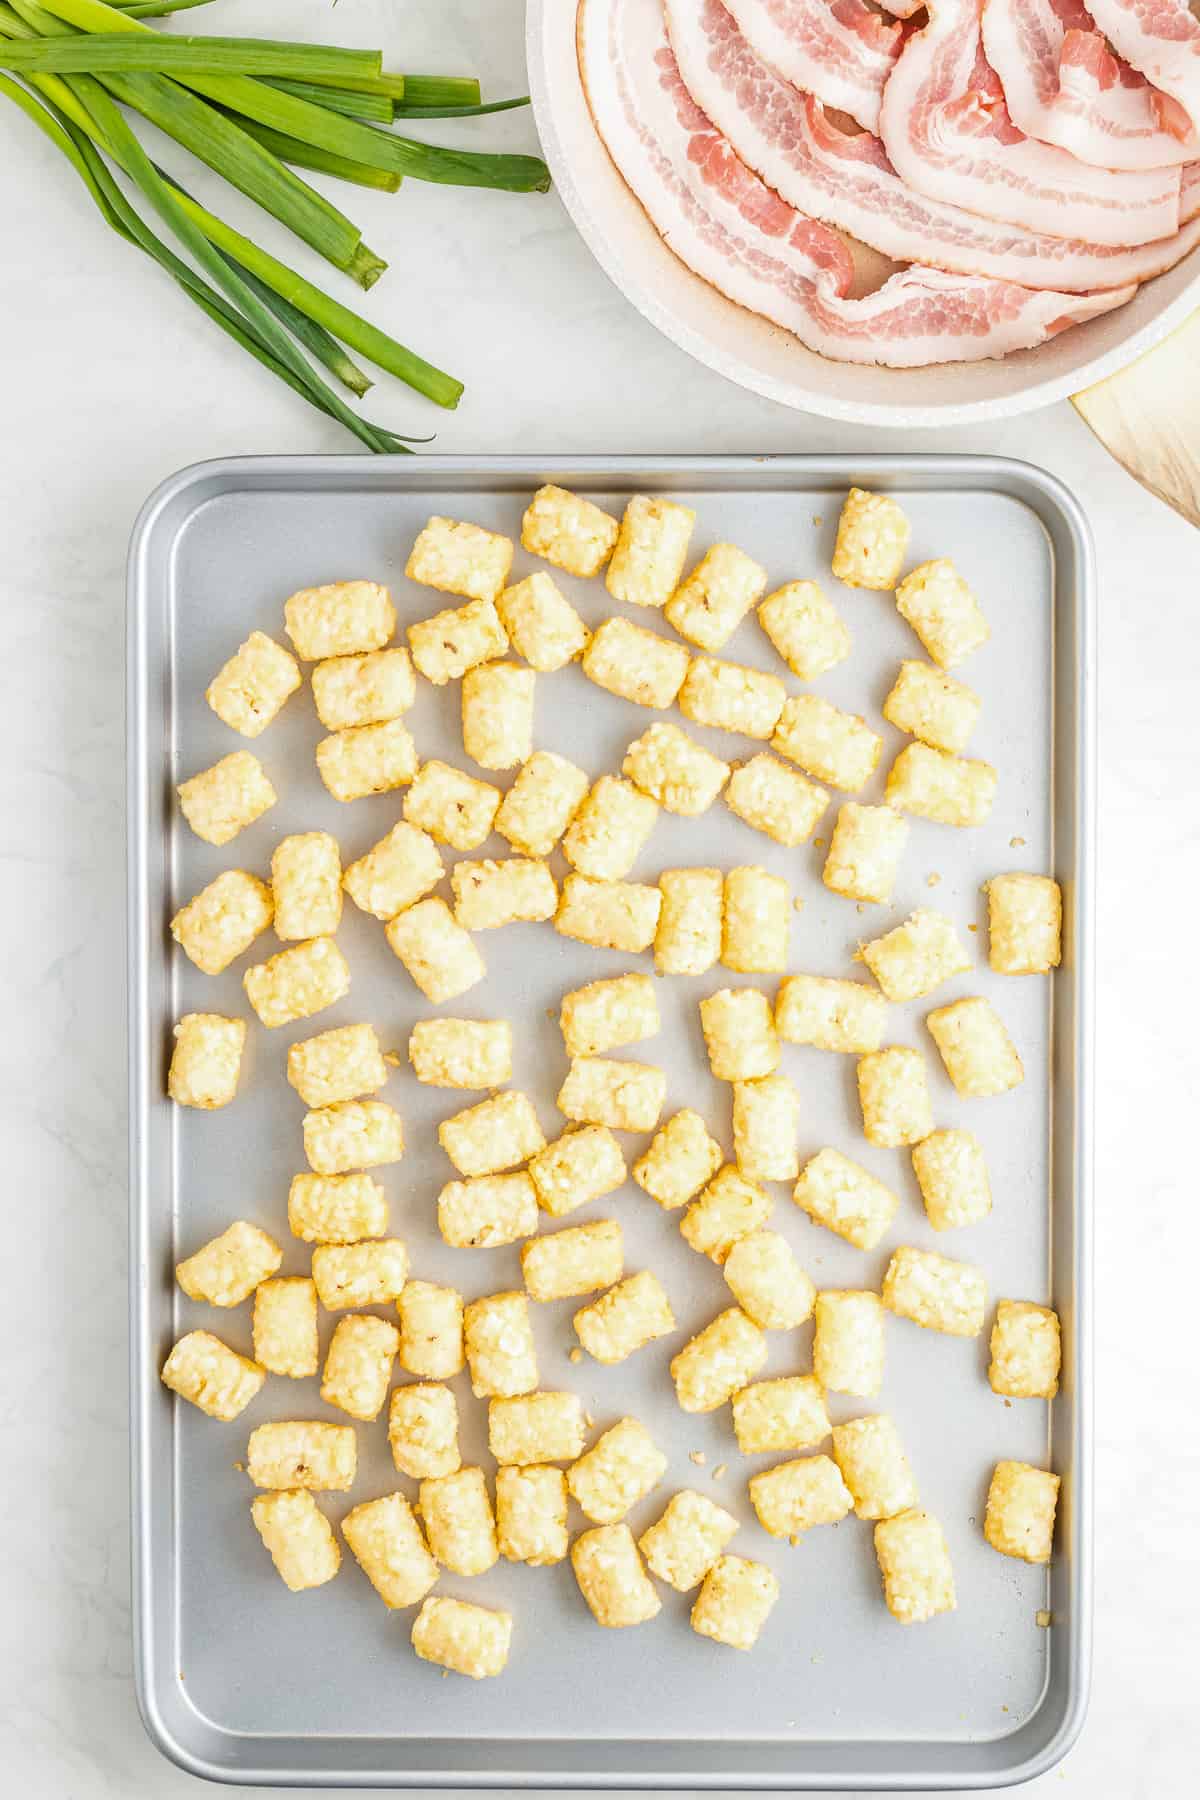 Baking sheet with frozen tater tots